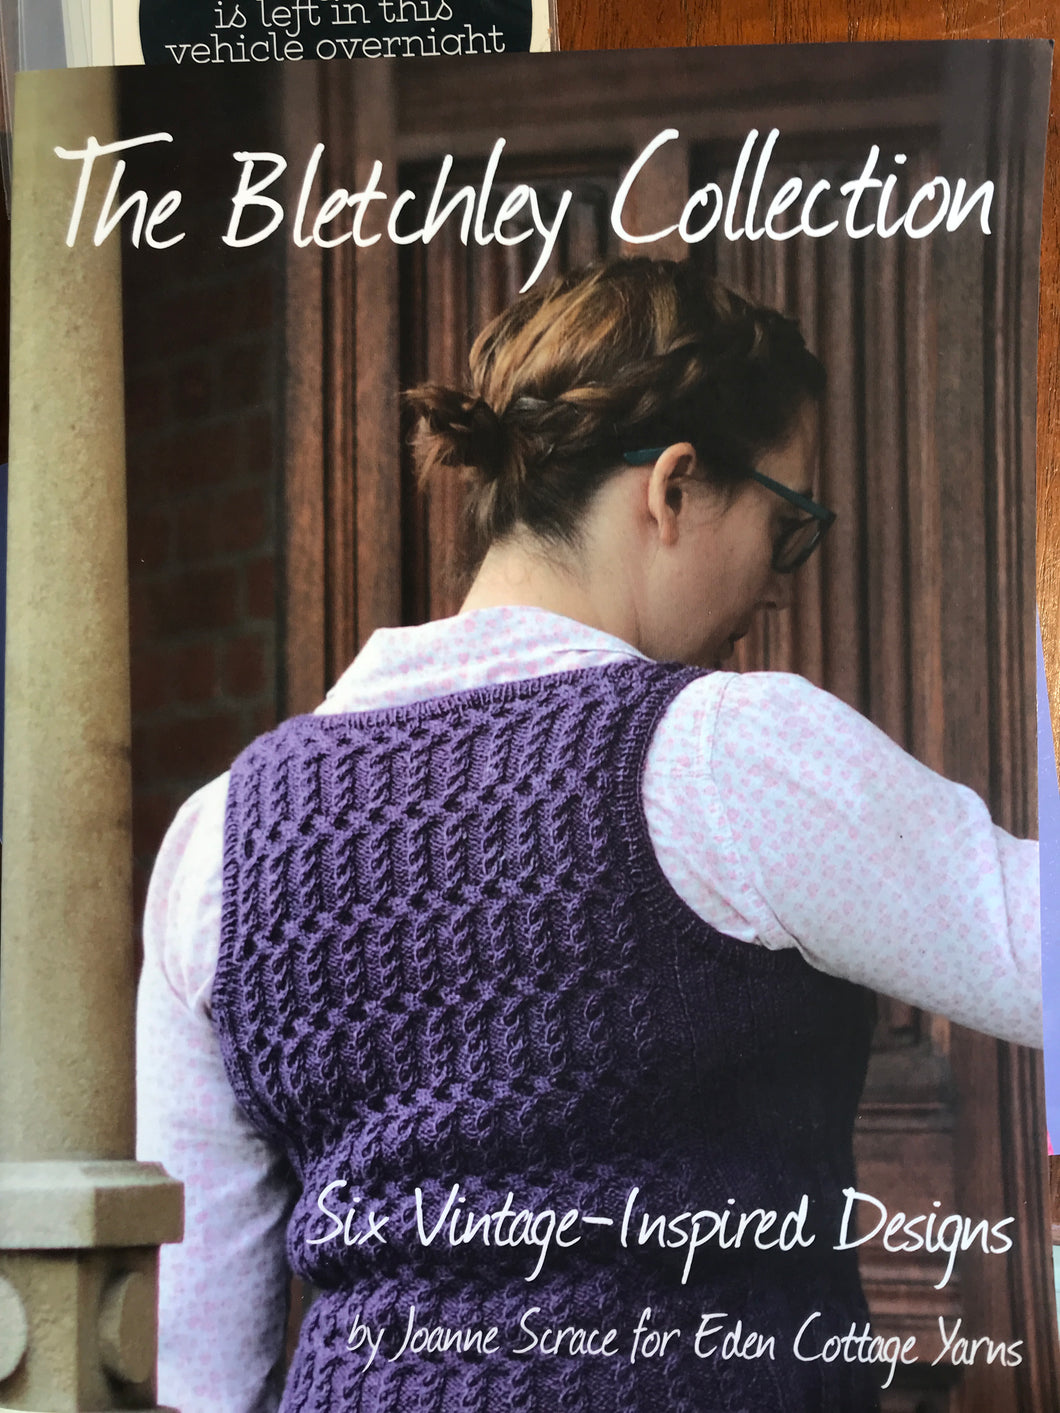 The Bletchley Collection by Eden Cottage